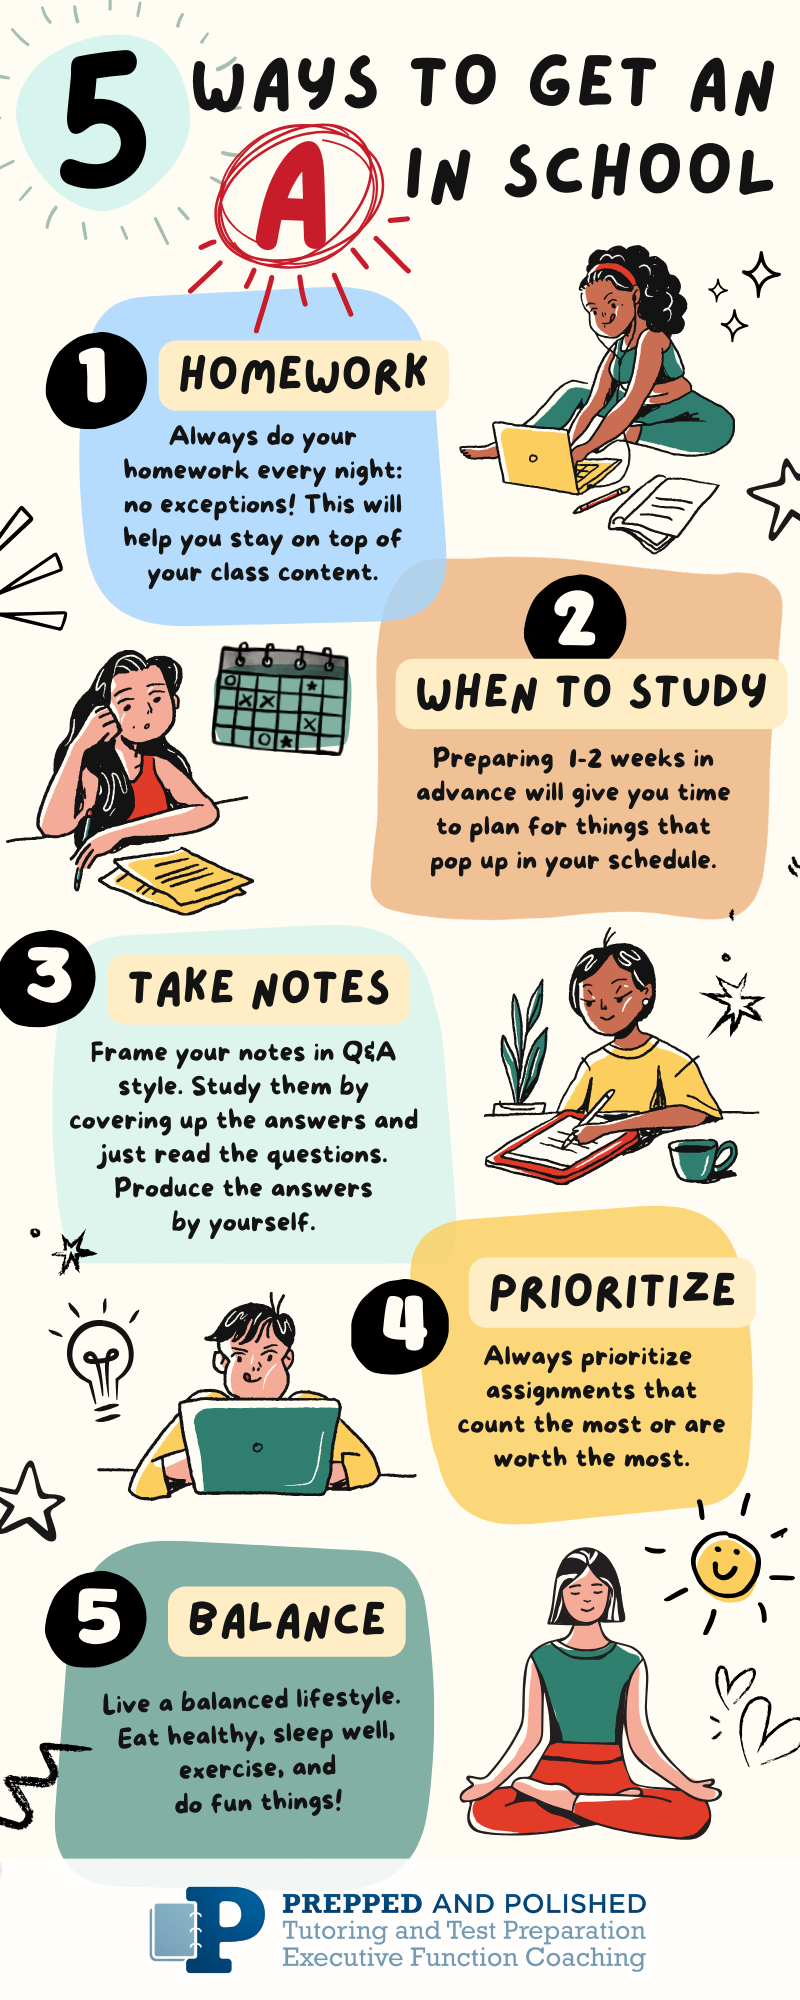 5 Ways to Get an 'A' in School